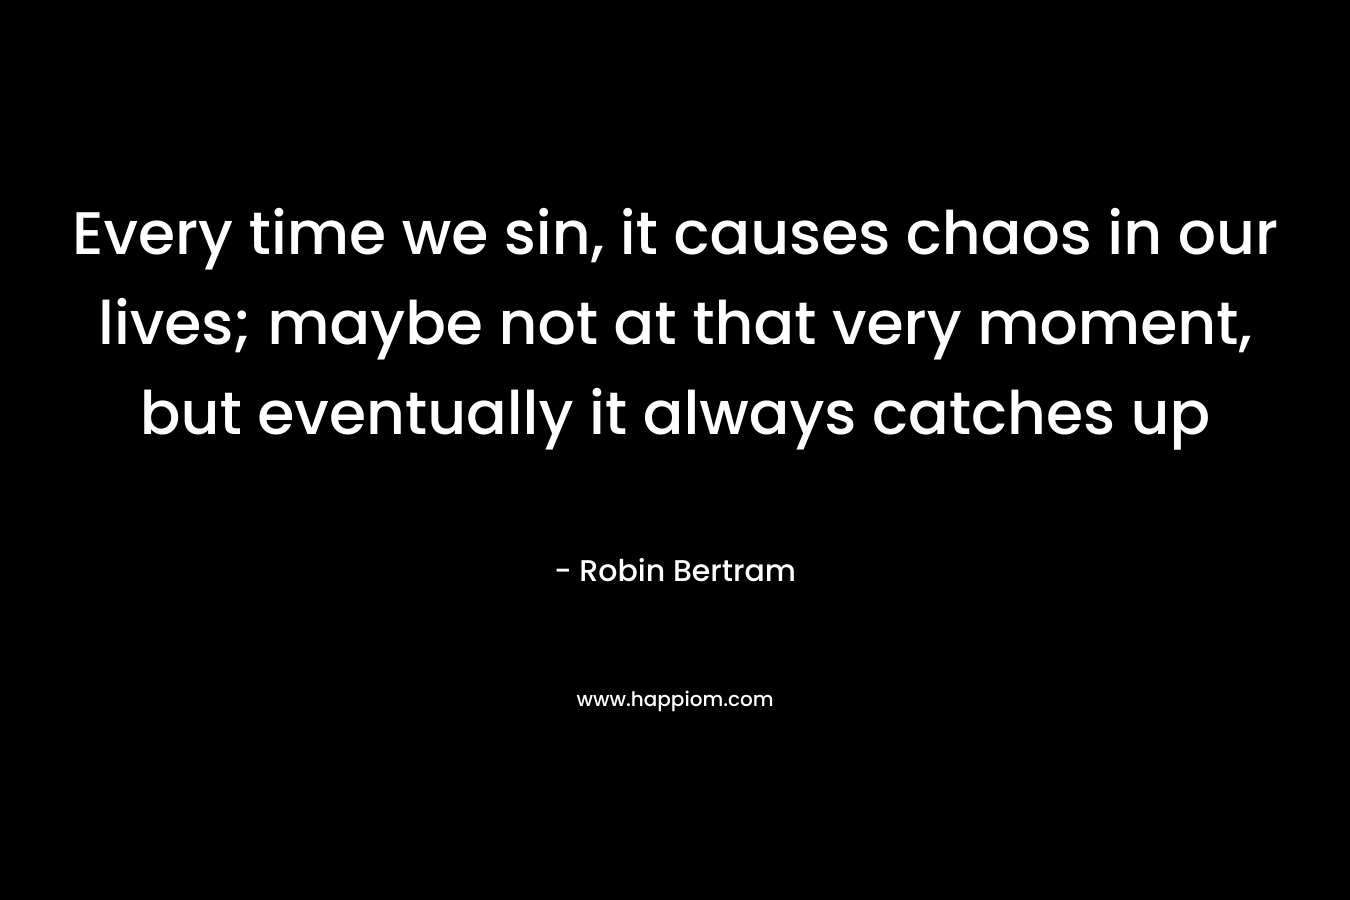 Every time we sin, it causes chaos in our lives; maybe not at that very moment, but eventually it always catches up – Robin Bertram